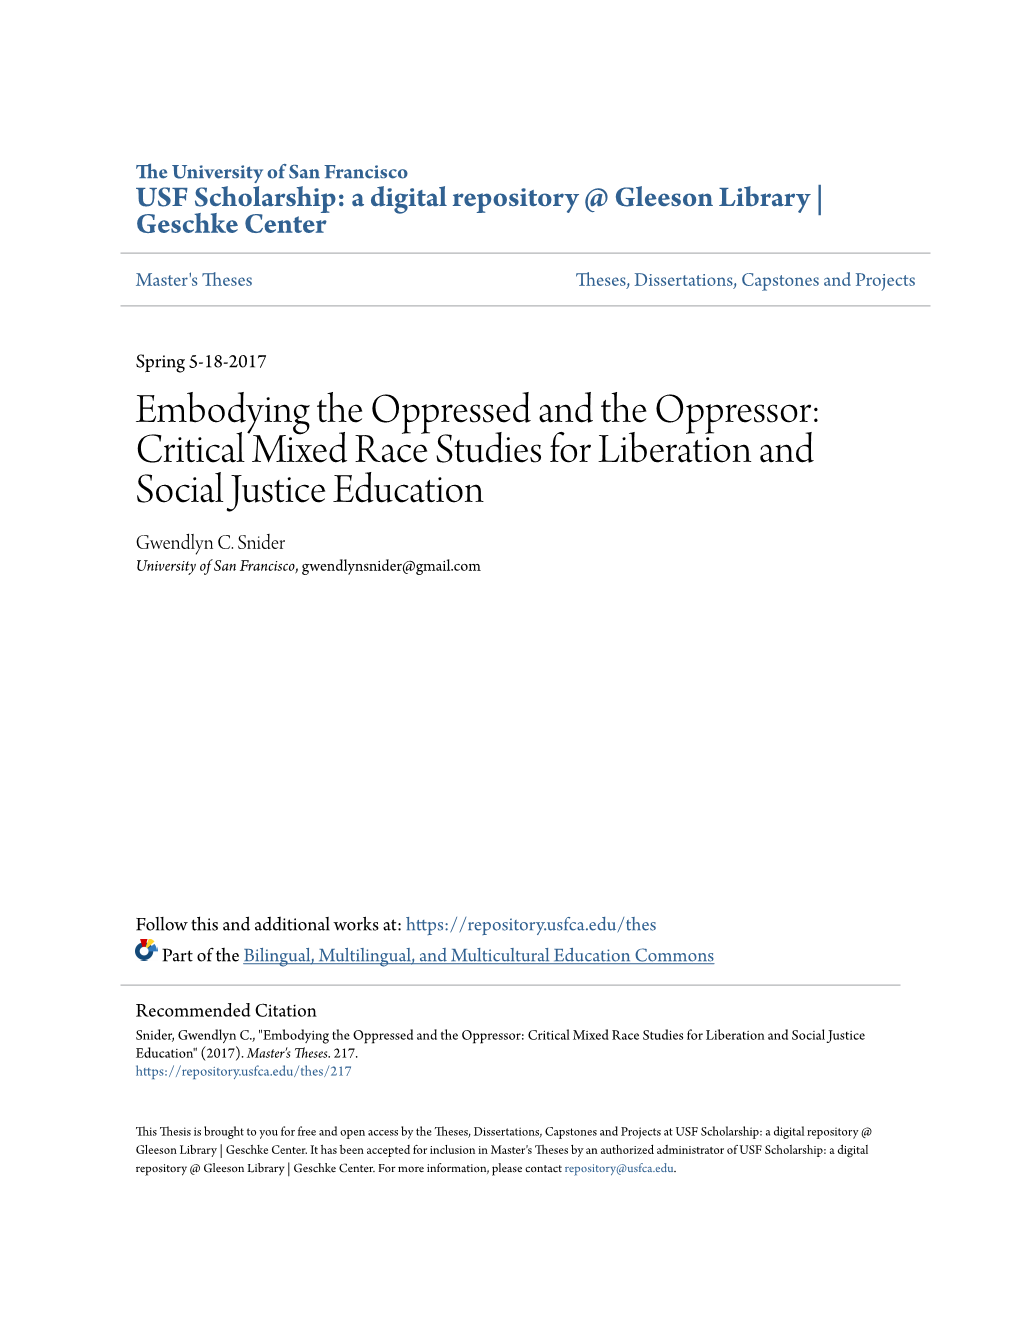 Embodying the Oppressed and the Oppressor: Critical Mixed Race Studies for Liberation and Social Justice Education Gwendlyn C